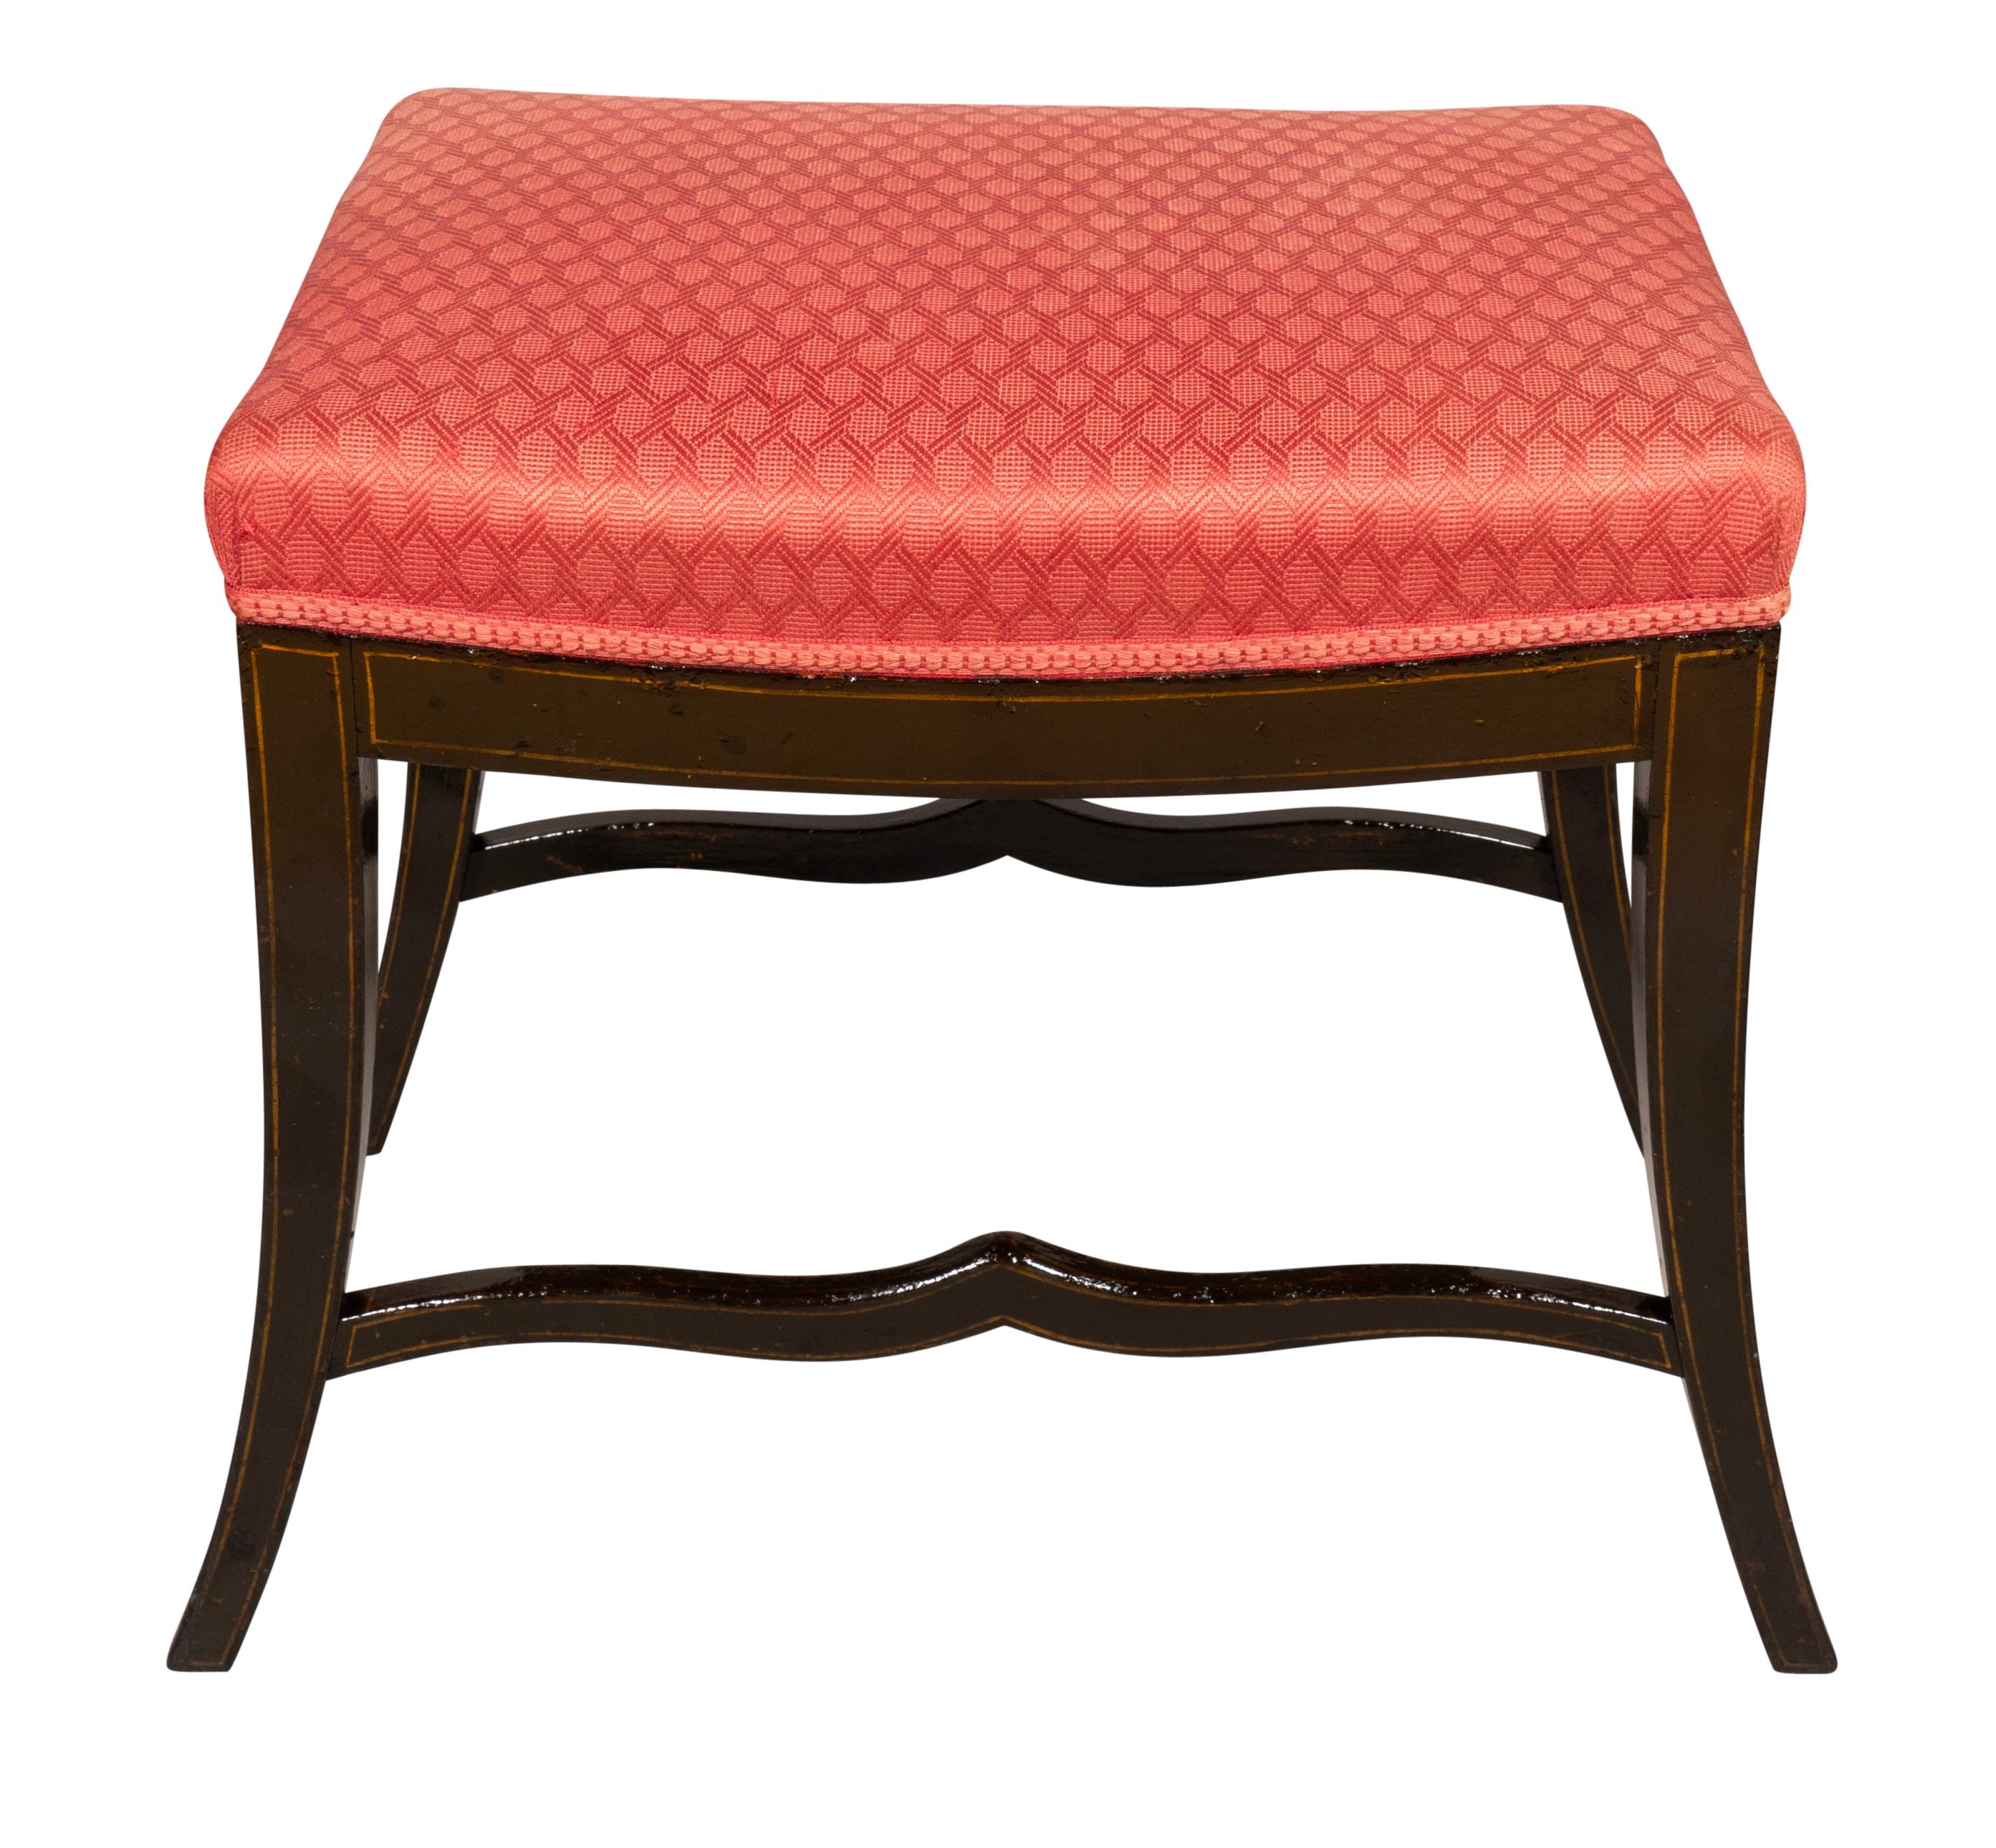 With rectangular upholstered seat. [used fabric]. With splayed legs and curved stretchers.